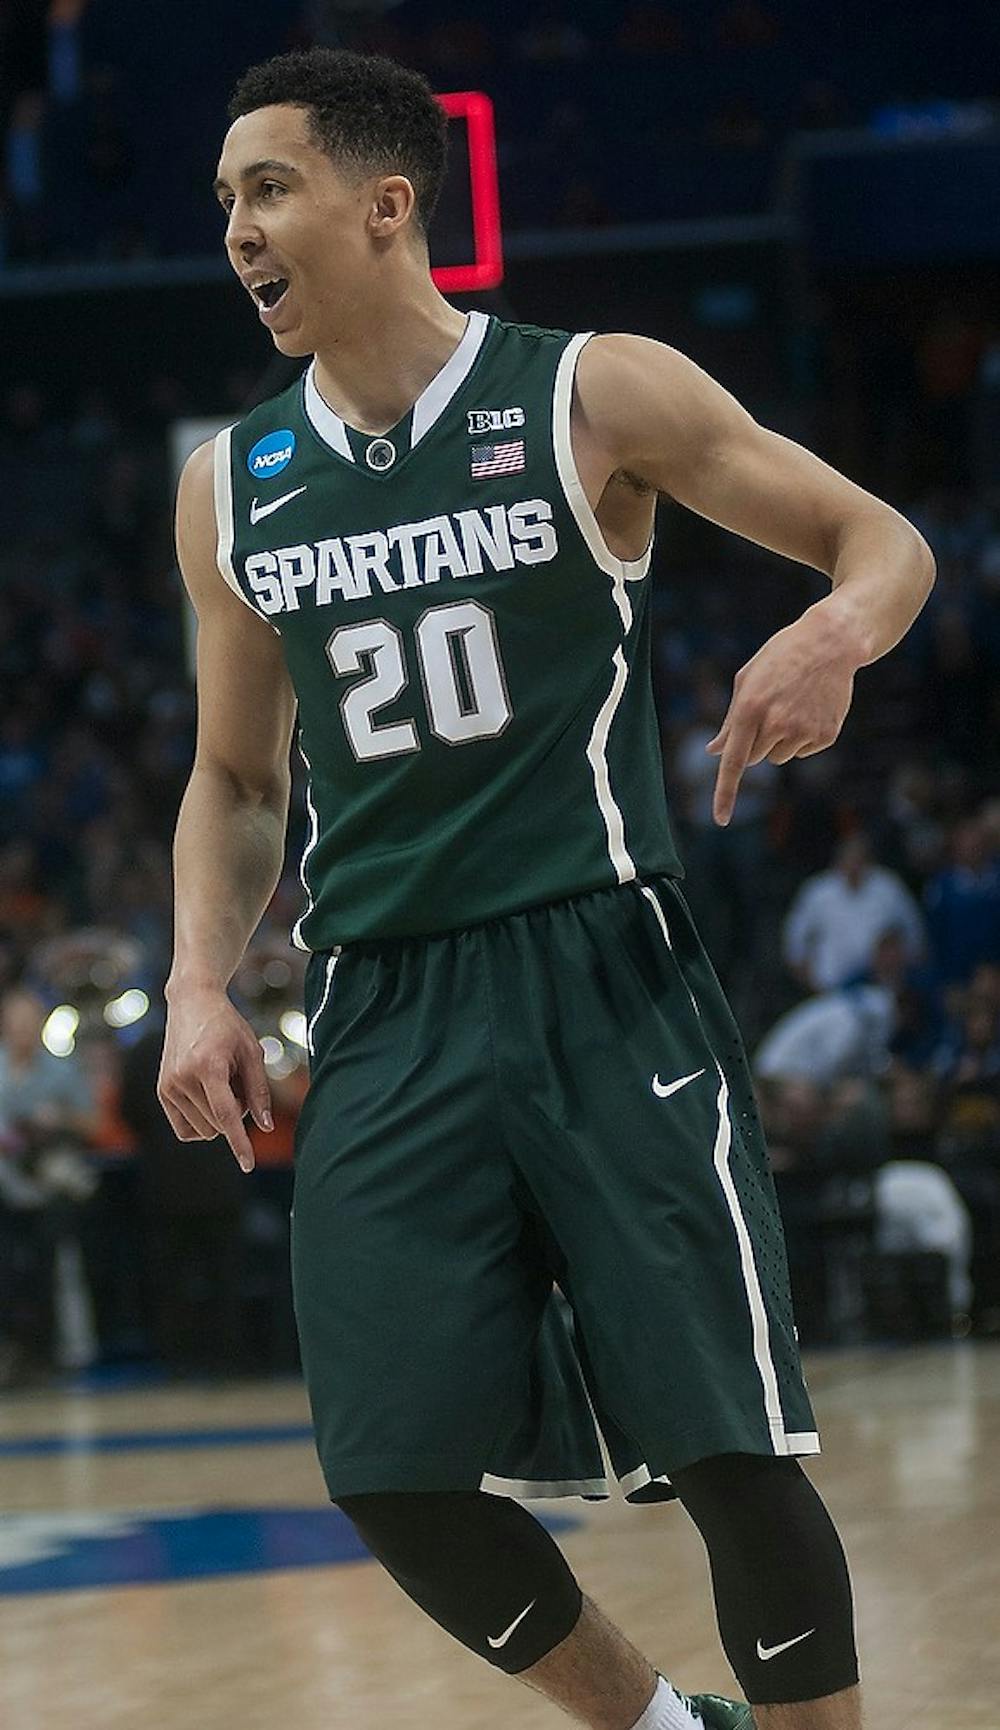 <p>Senior guard Travis Trice celebrates March 22, 2015, during the game against Virginia in the Round of 32 of the NCAA tournament at the Time Warner Cable Arena in Charlotte, NC. The Spartans defeated the Cavaliers 60-54.  Alice Kole/The State News</p>